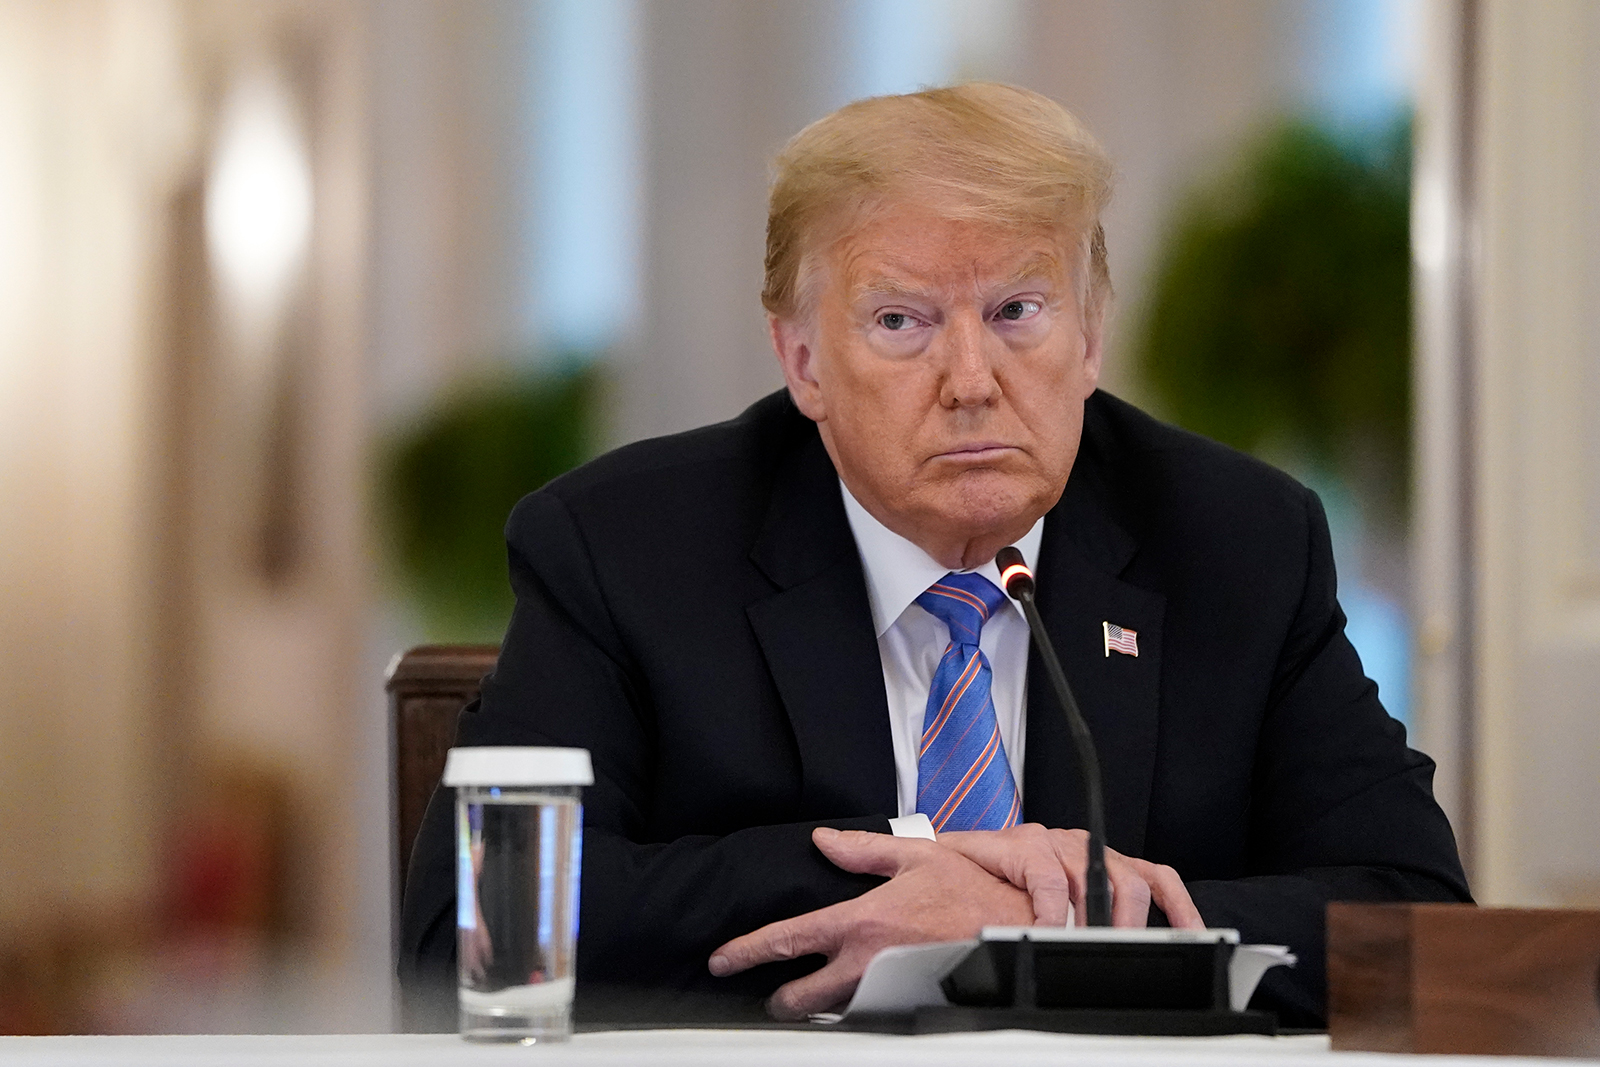 US President Donald Trump participates in a meeting of the American Workforce Policy Advisory Board in the East Room of the White House on June 26, in Washington, DC.